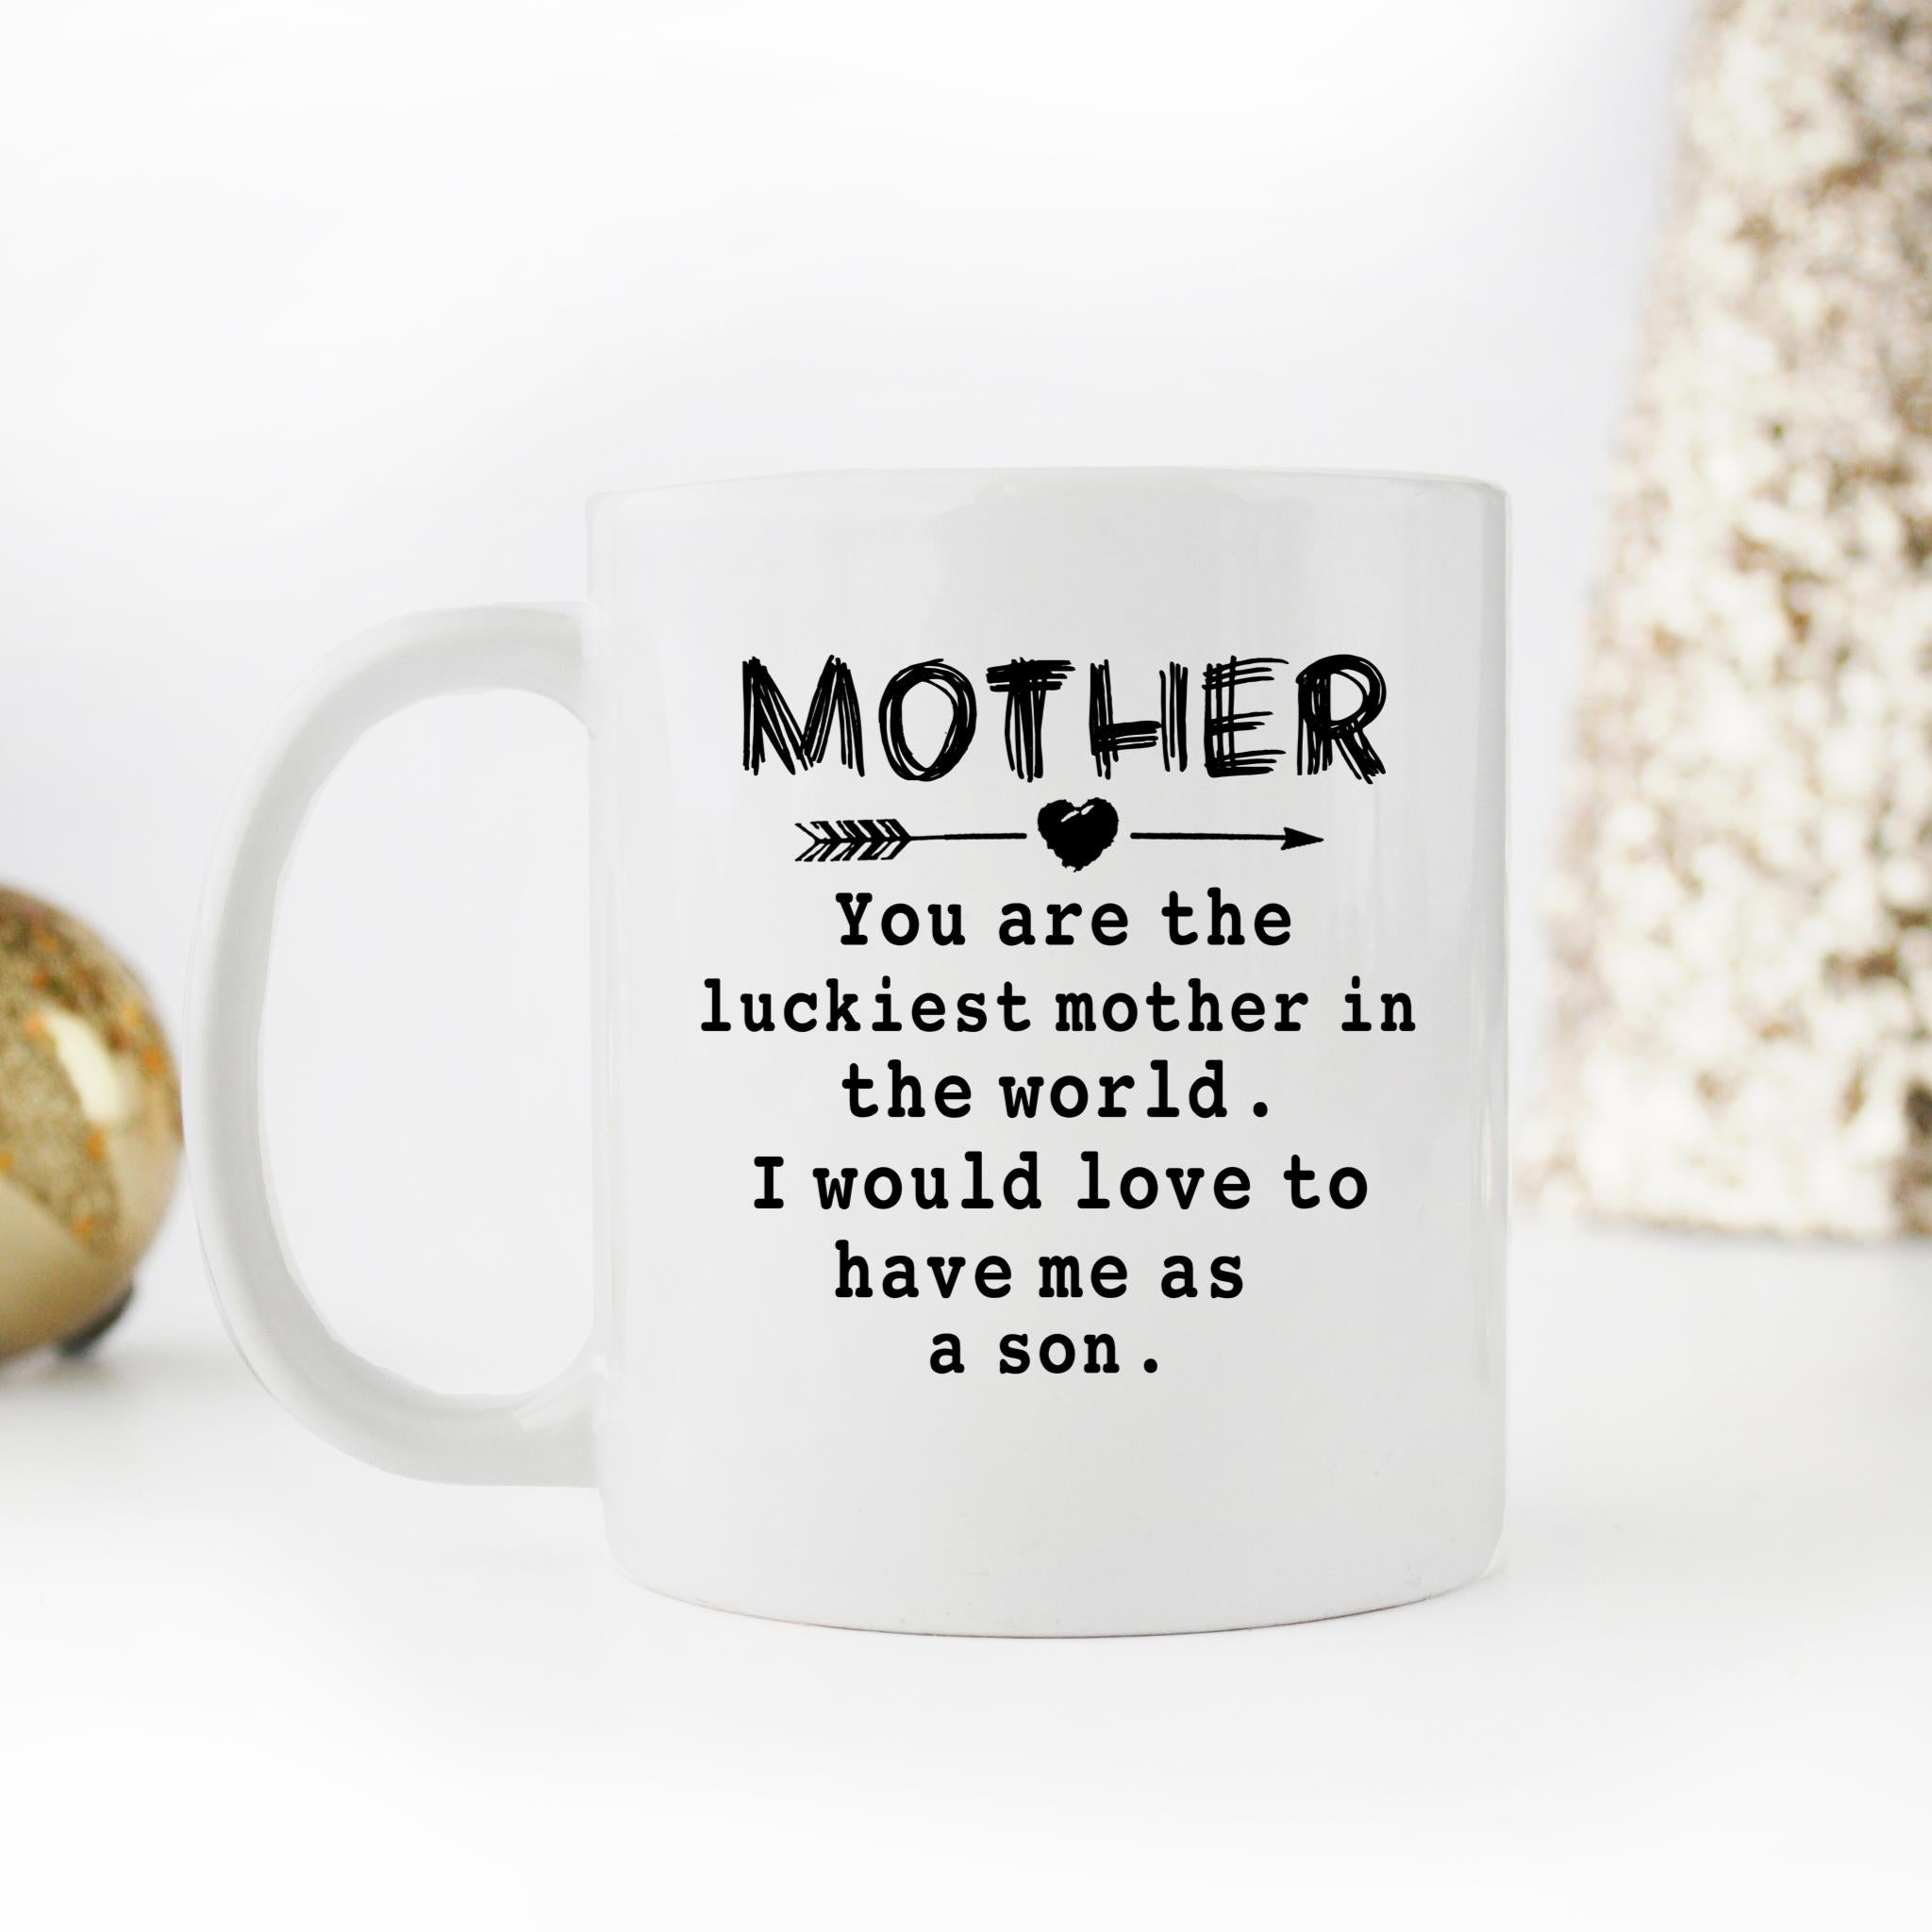 Skitongifts Funny Ceramic Novelty Coffee Mug You're The Luckiest Mother In The World. I Would Love To Have Me As A Son Mothers Day Gifts Ideas RZTqBLu